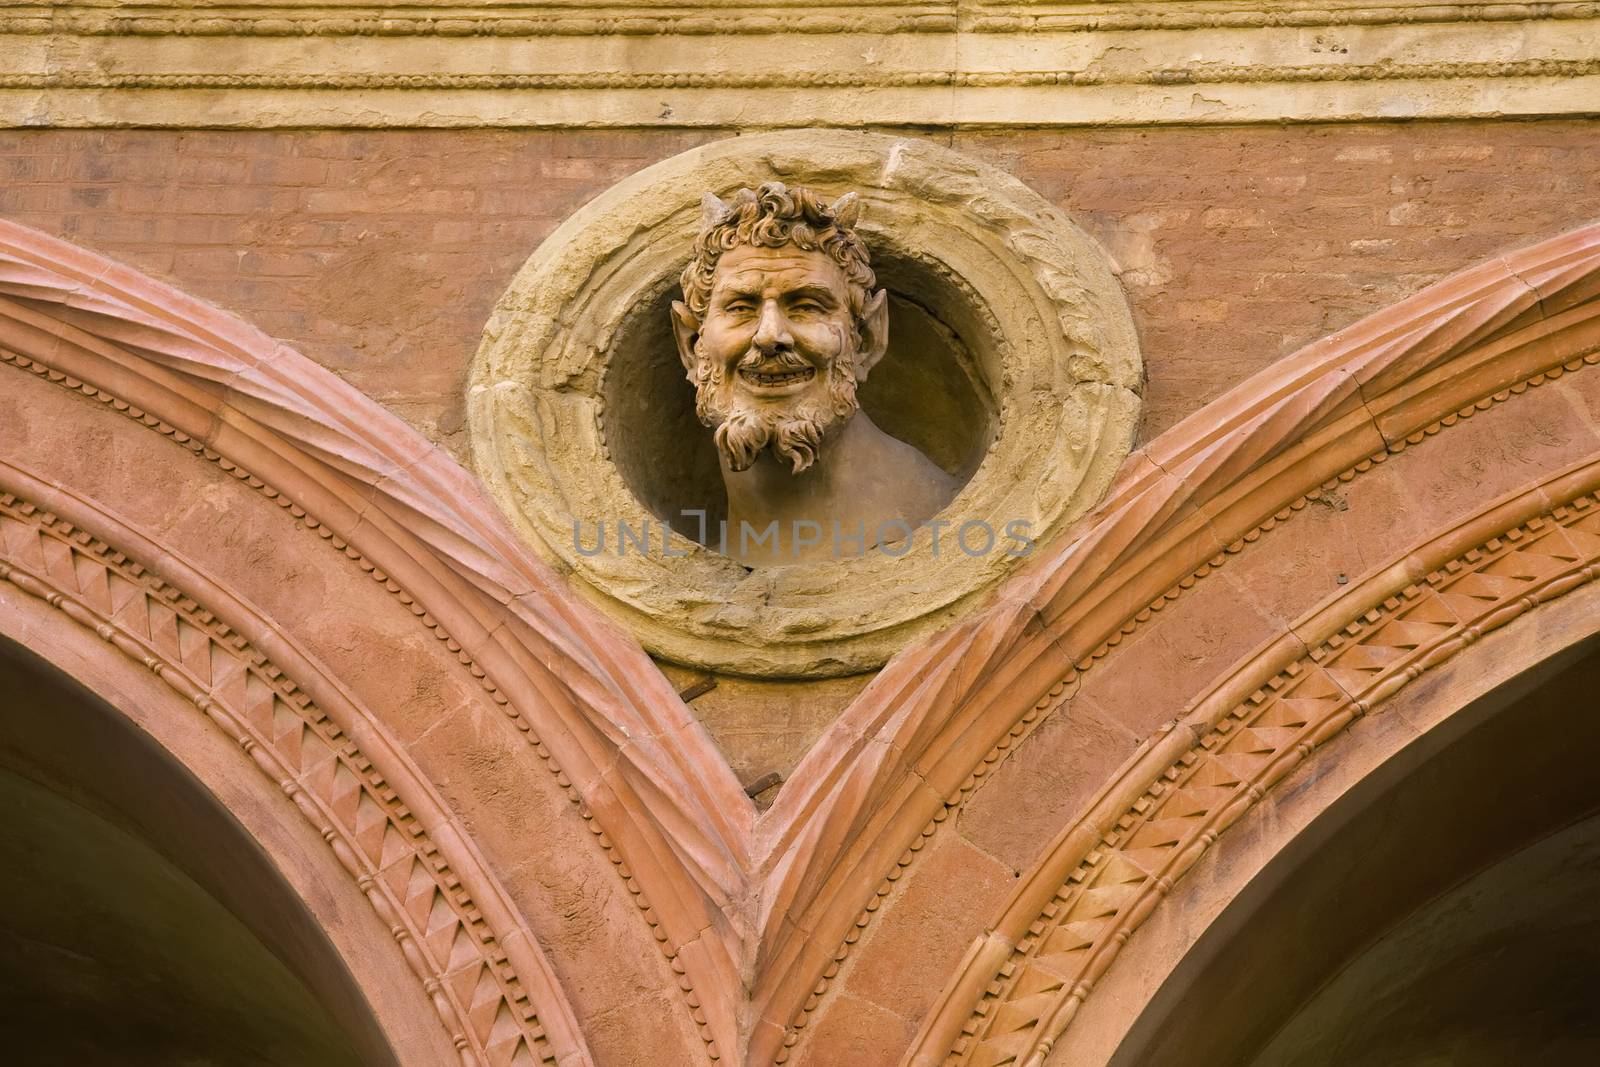 The devil's head decoration on medieval building in Bologna by fotoecho